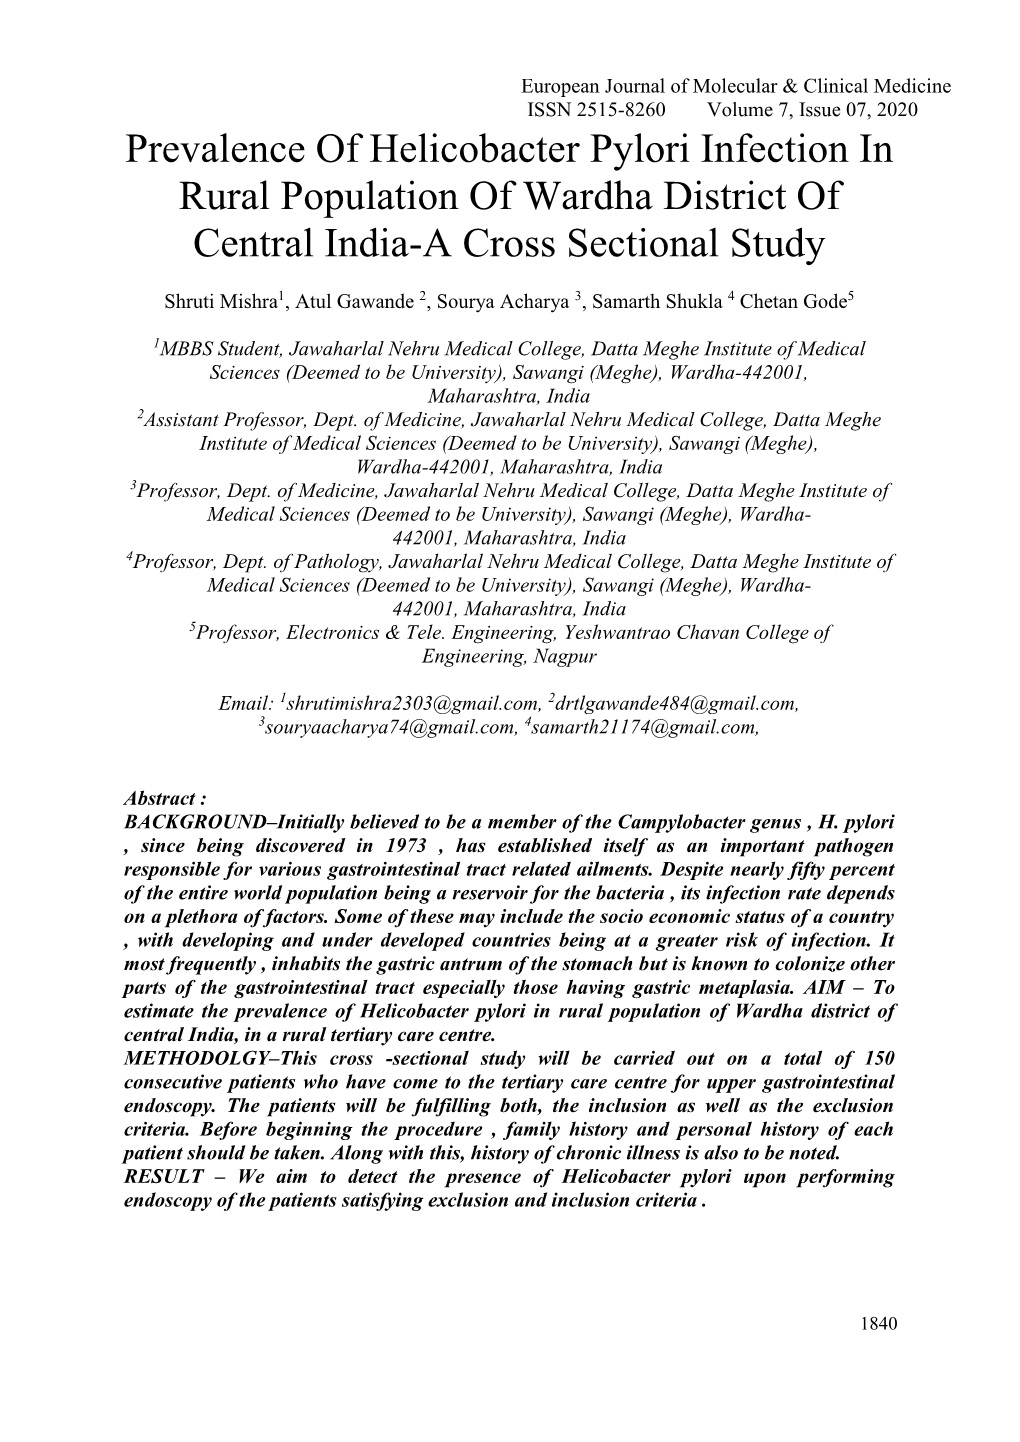 Prevalence of Helicobacter Pylori Infection in Rural Population of Wardha District of Central India-A Cross Sectional Study